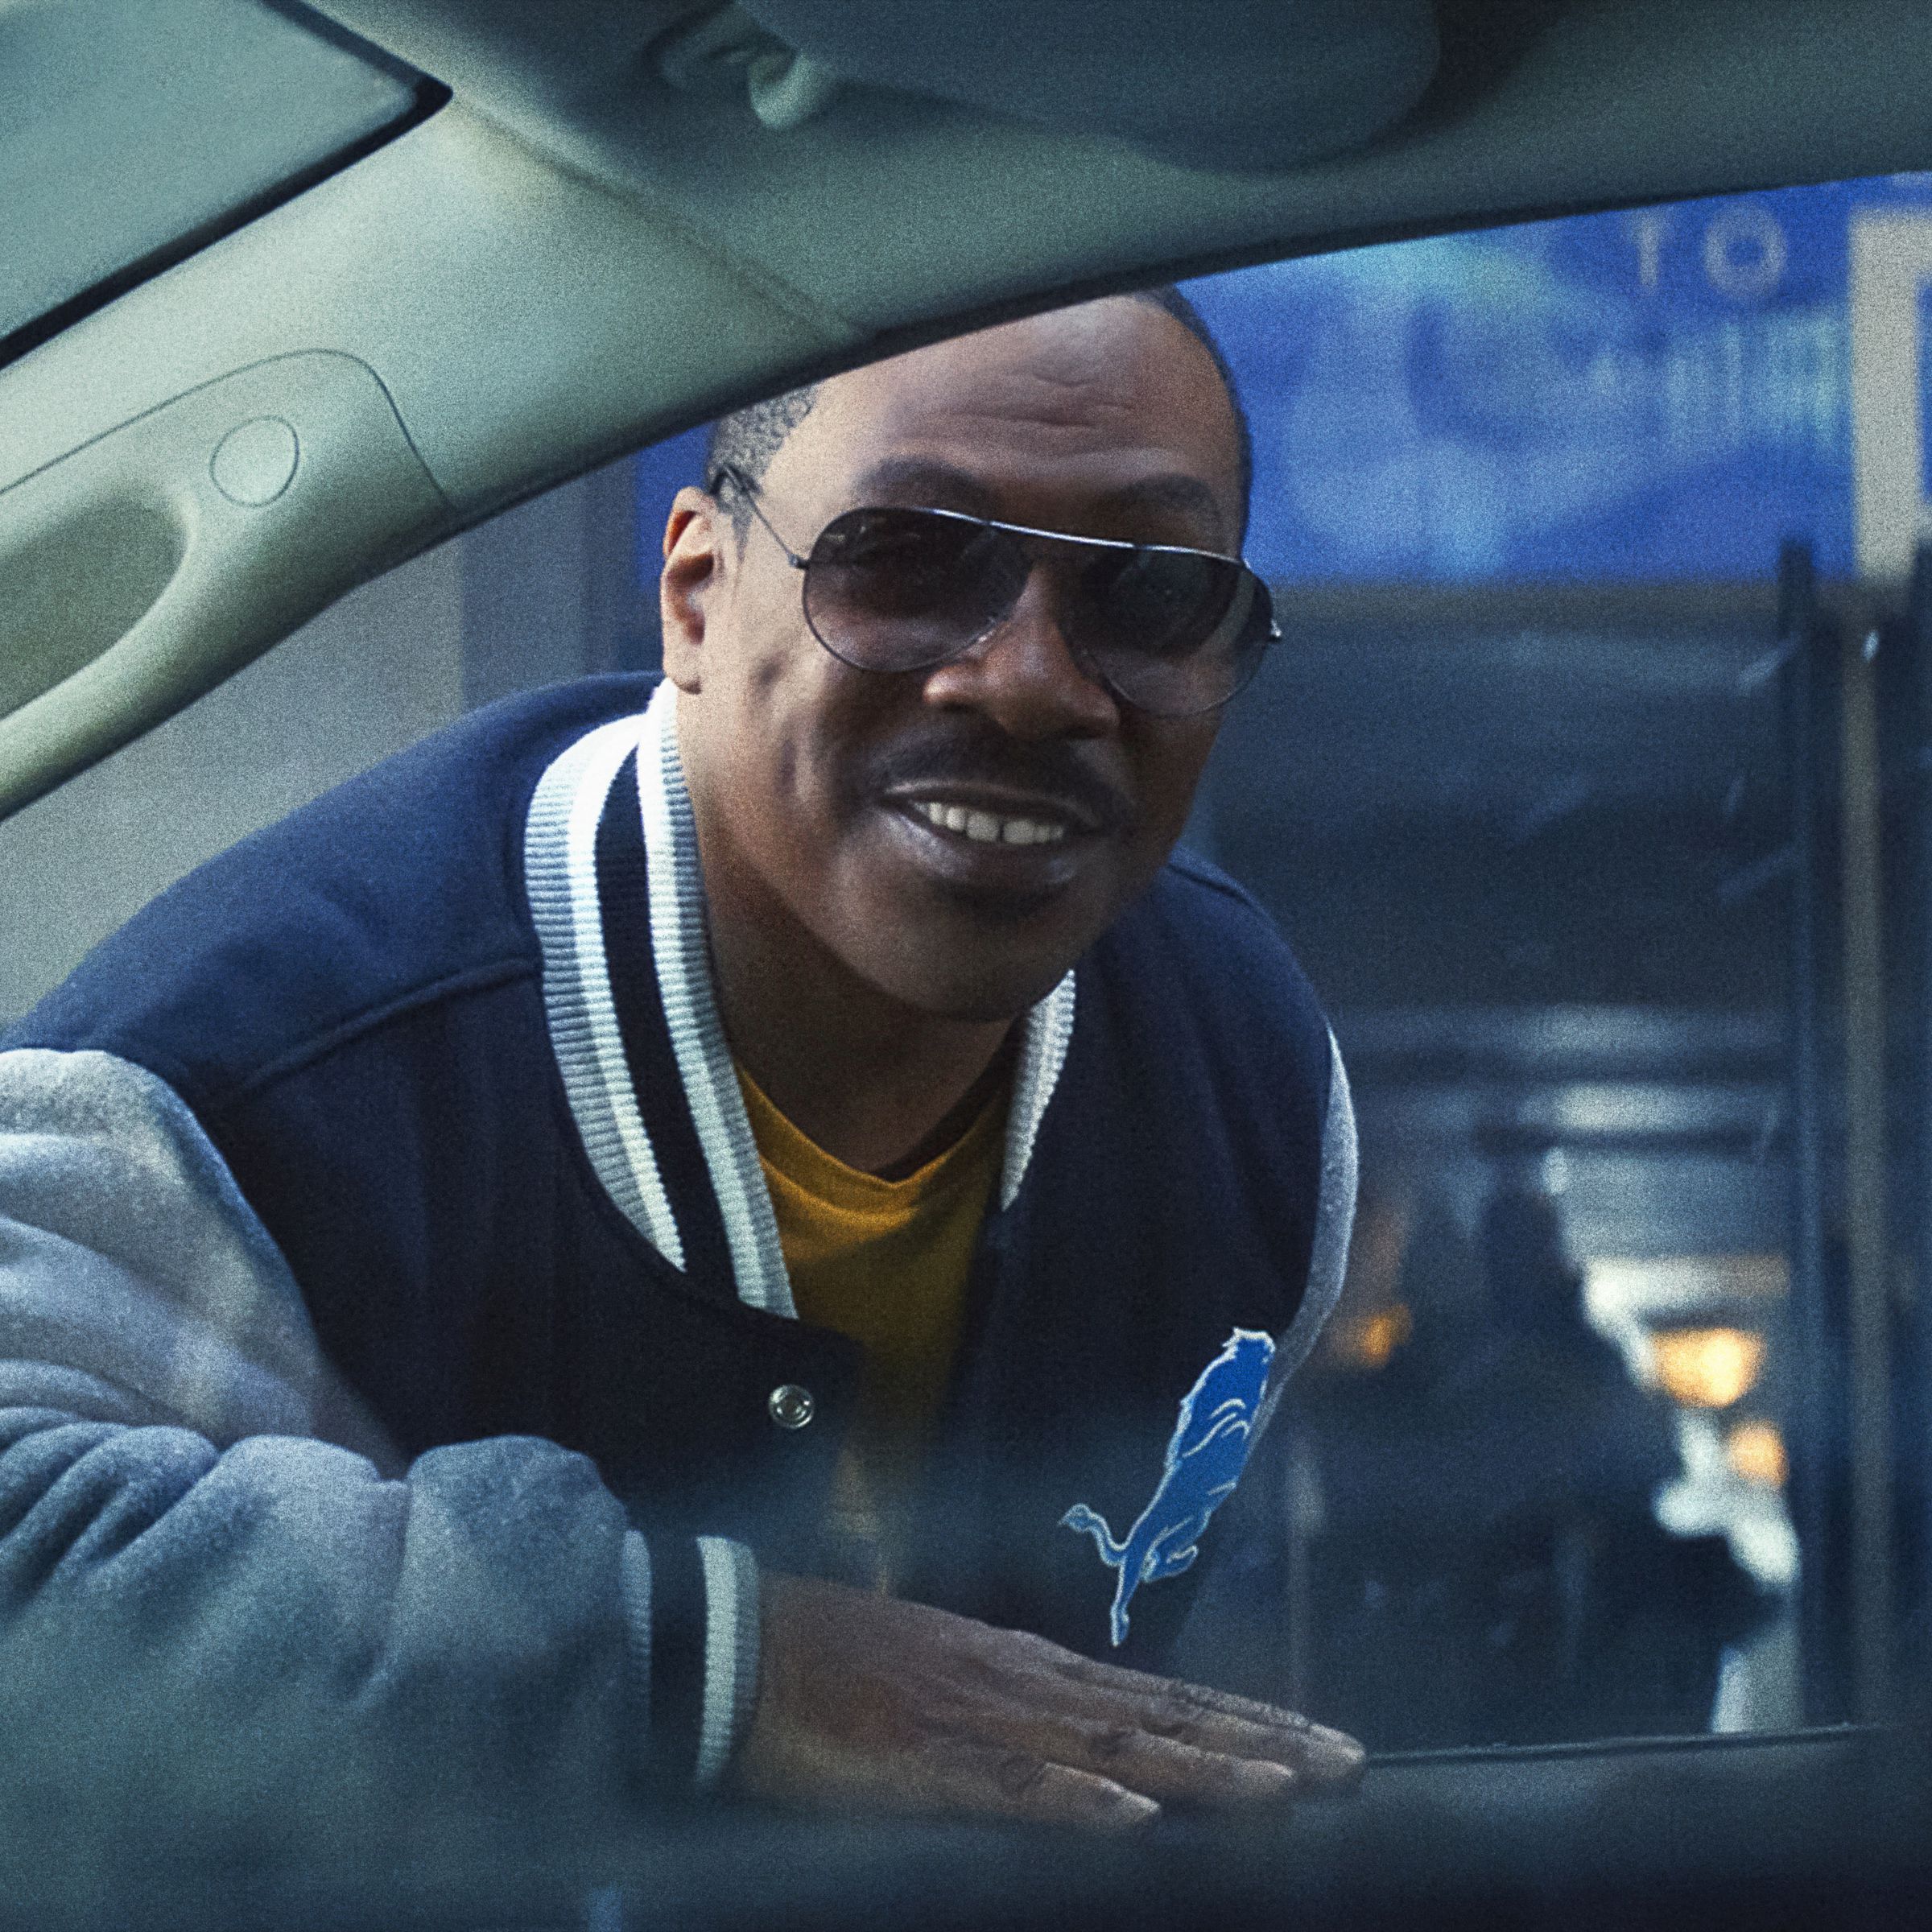 A man wearing aviators and a letterman jacket leaning over to peer into the window of a parked car.